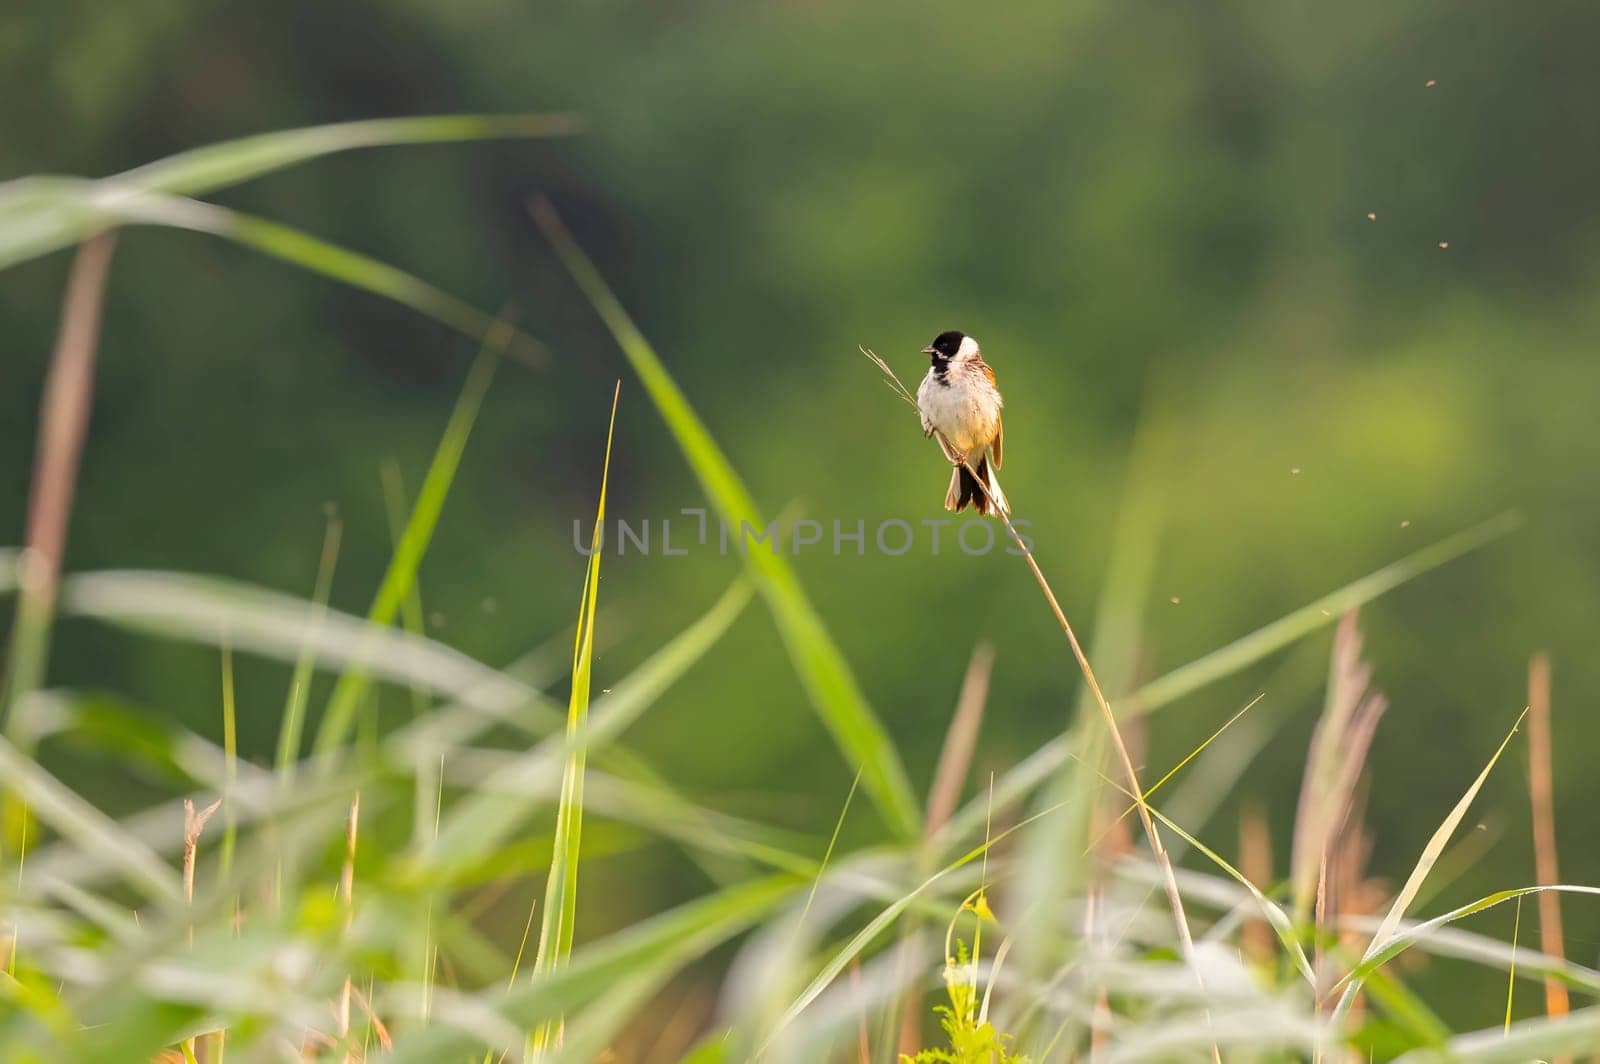 A wild A charming Common Reed Bunting perched on a slender stem amidst lush greenery, showcasing the beauty of nature.duck glides on sunset-kissed waters, surrounded by the mesmerizing hues of orange. Serene beauty in perfect harmony.